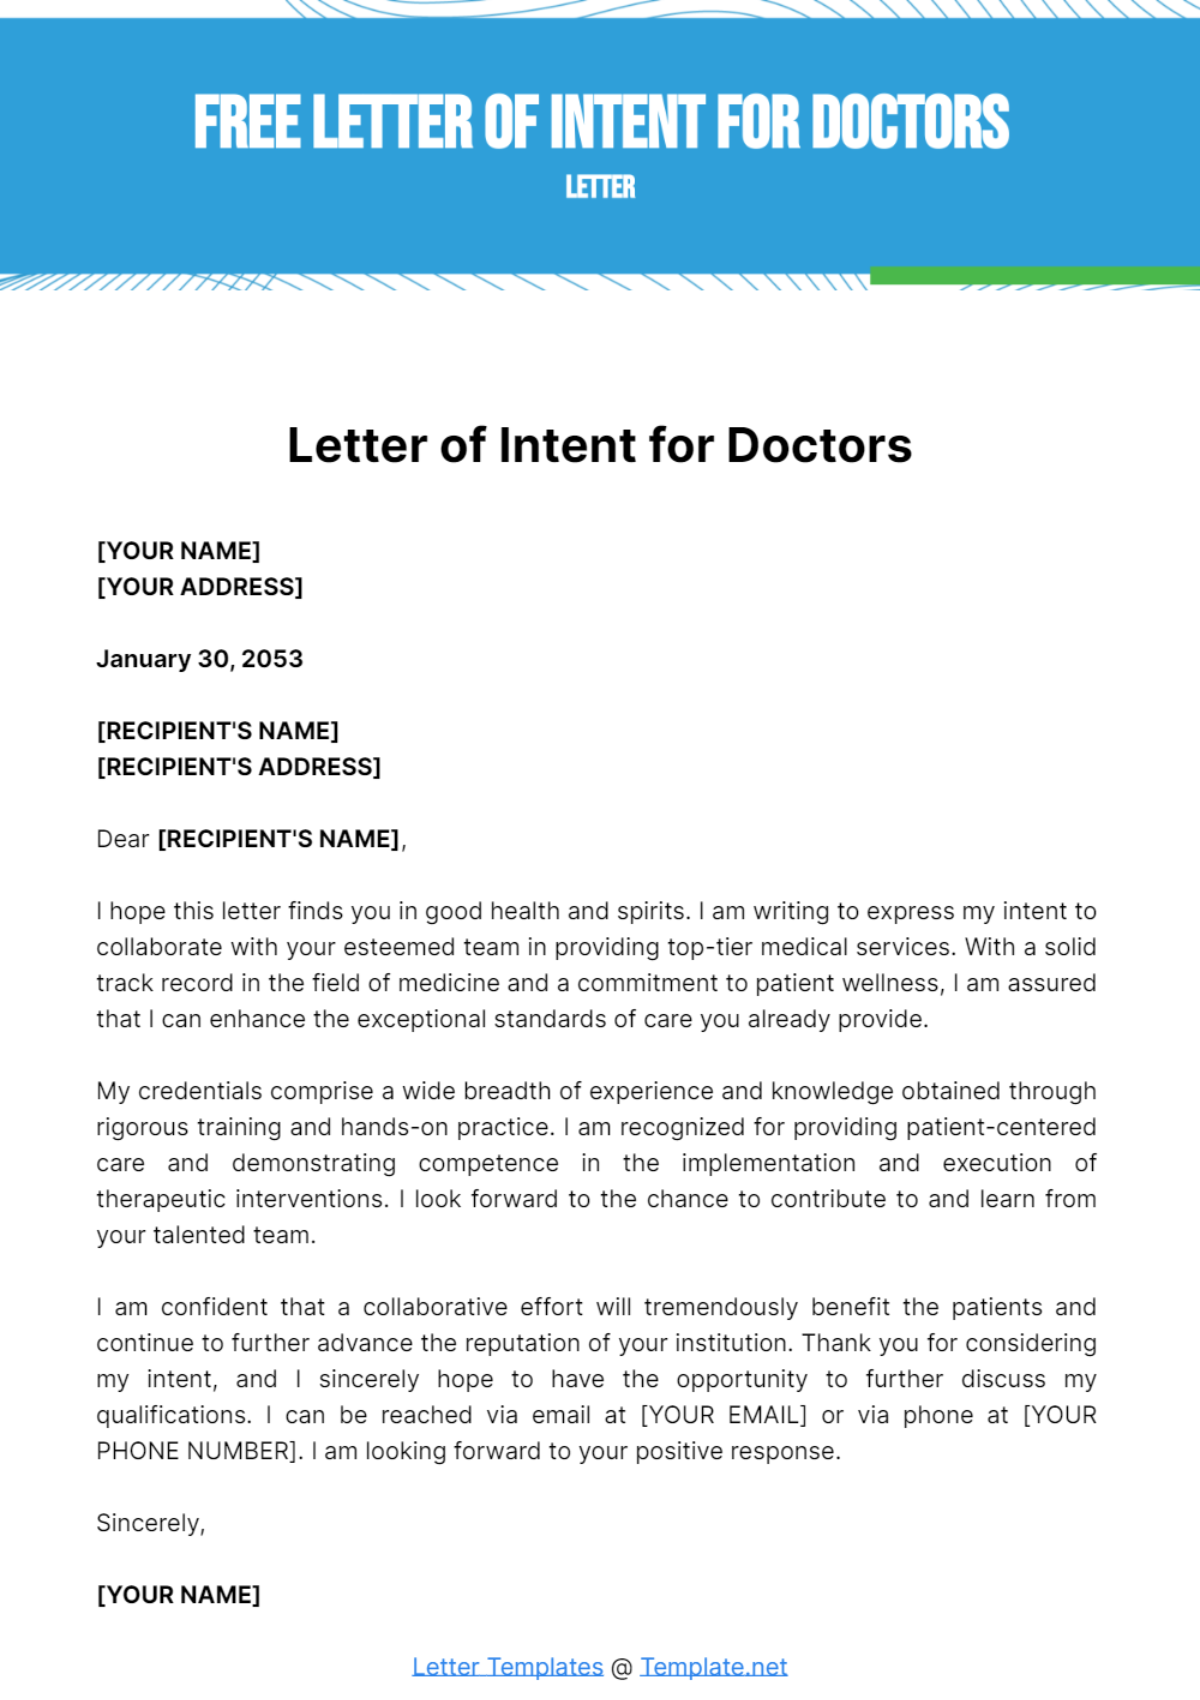 Letter of Intent for Doctors Template